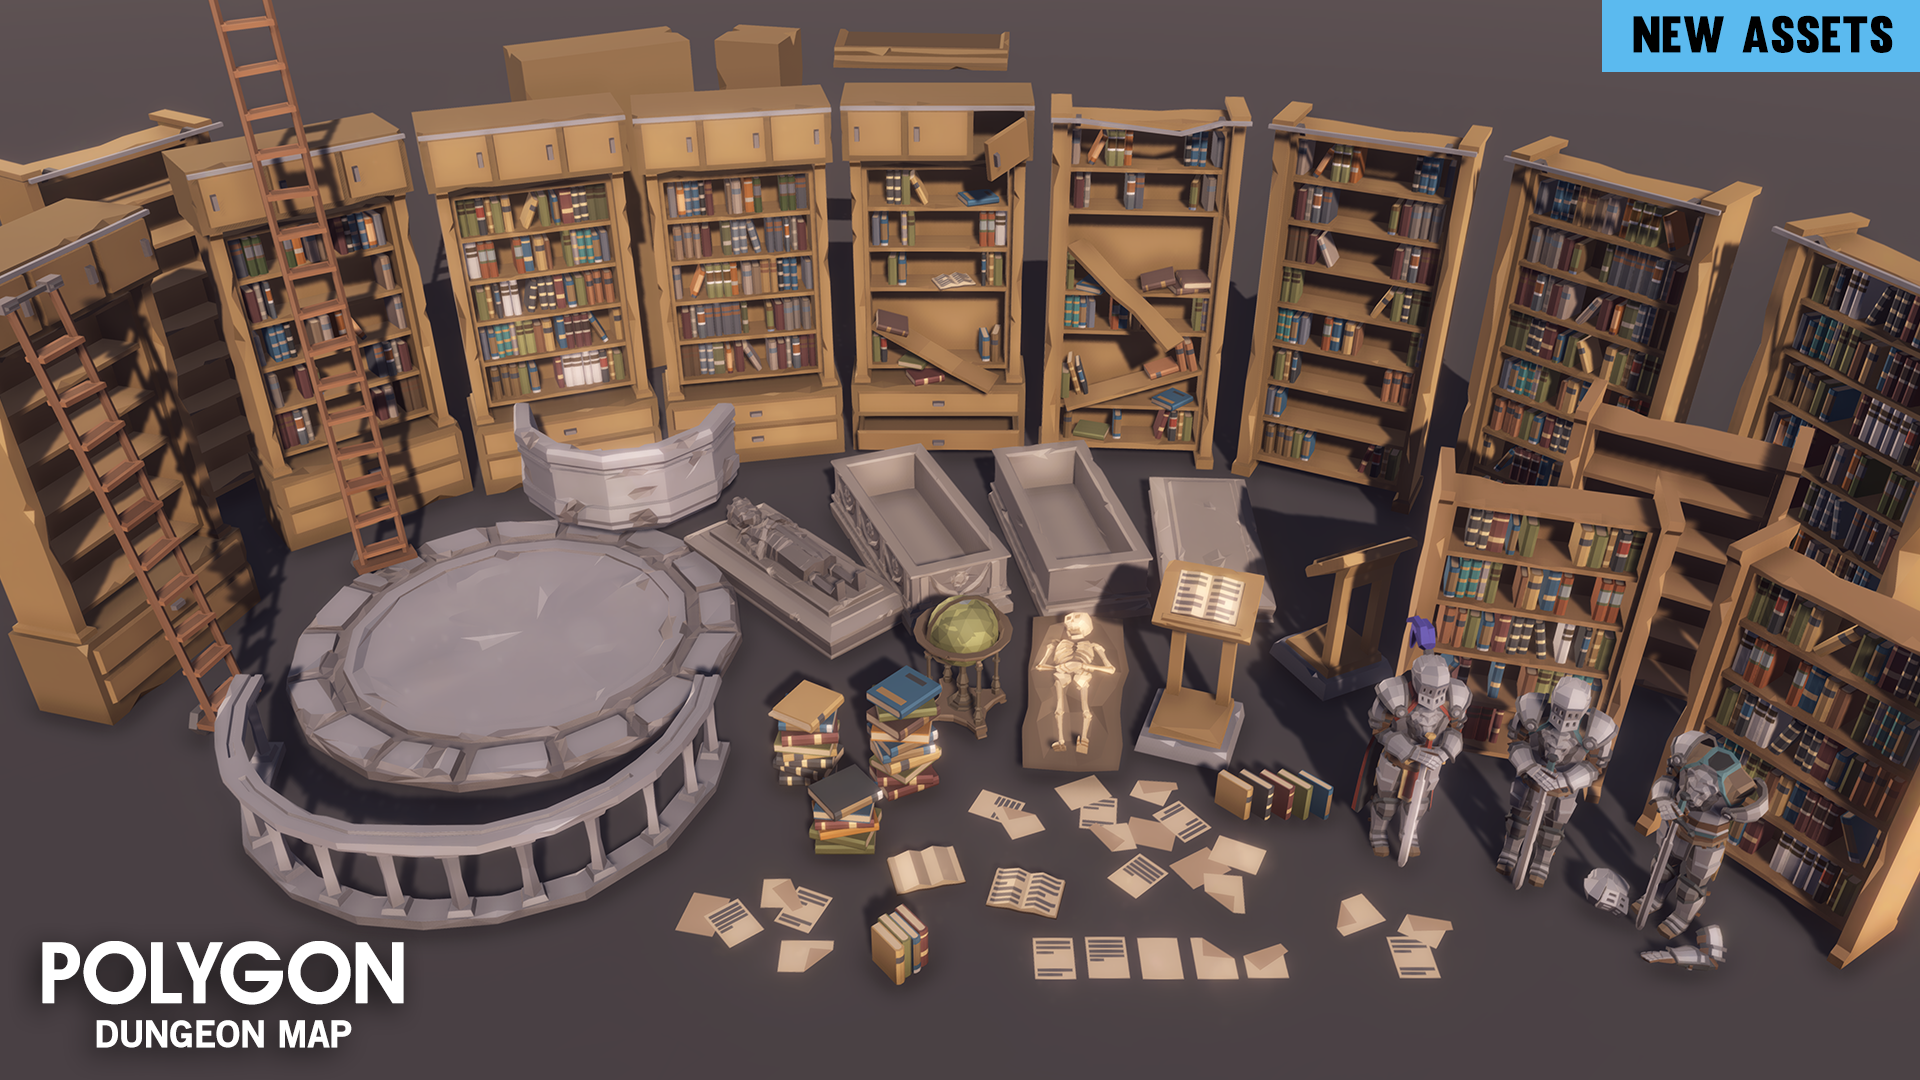 Dungeon map low poly asset pack featuring props, statues, bookshelves, railings, tombs, crypts and walls